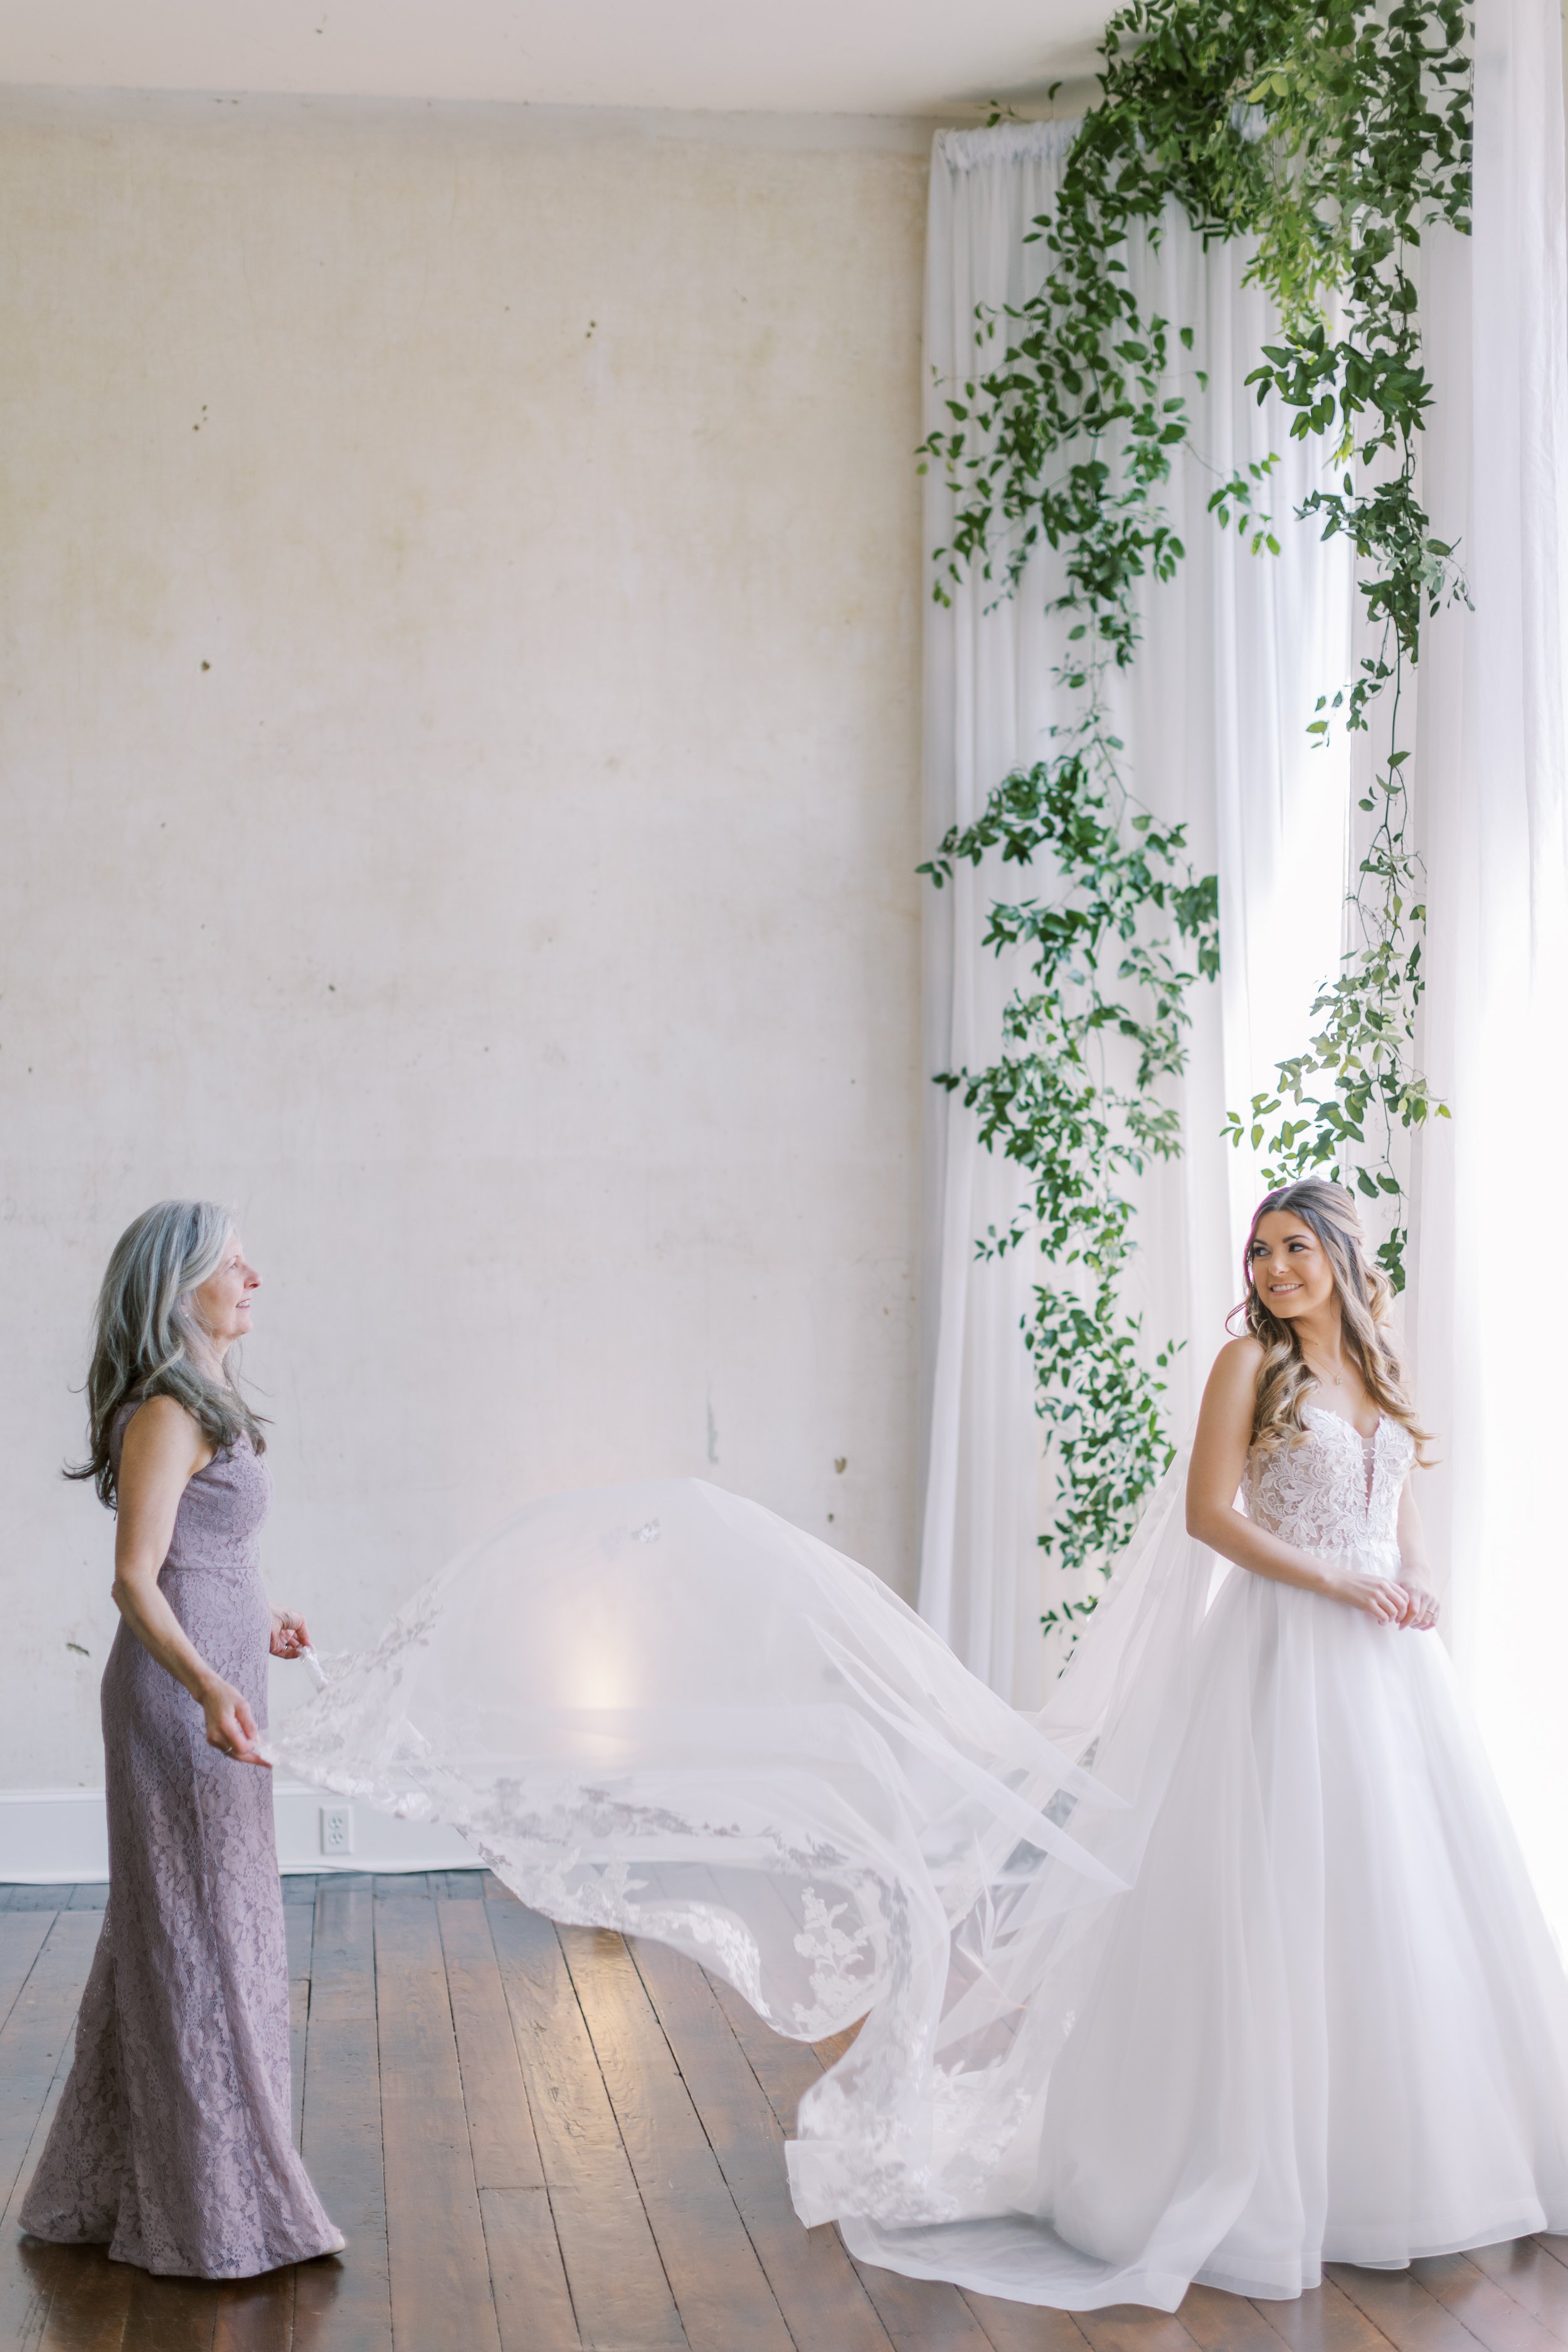 Mother of the bride helping daughter get ready in large room with greenery